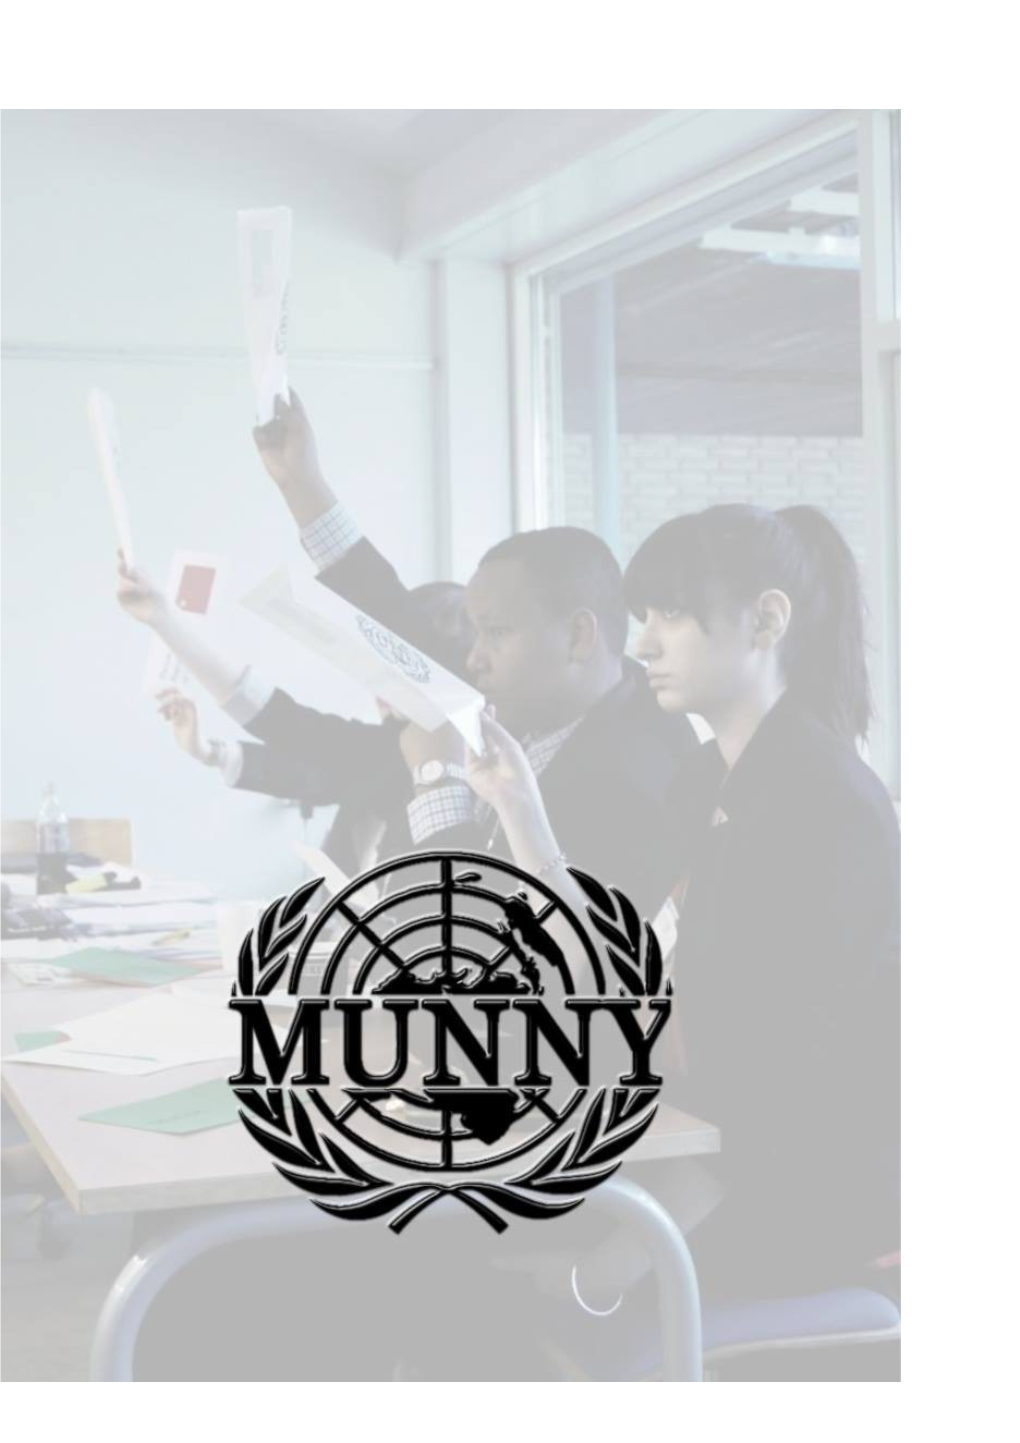 These Rules of Procedure Manifest the Official Order of the Annual Model United Nations